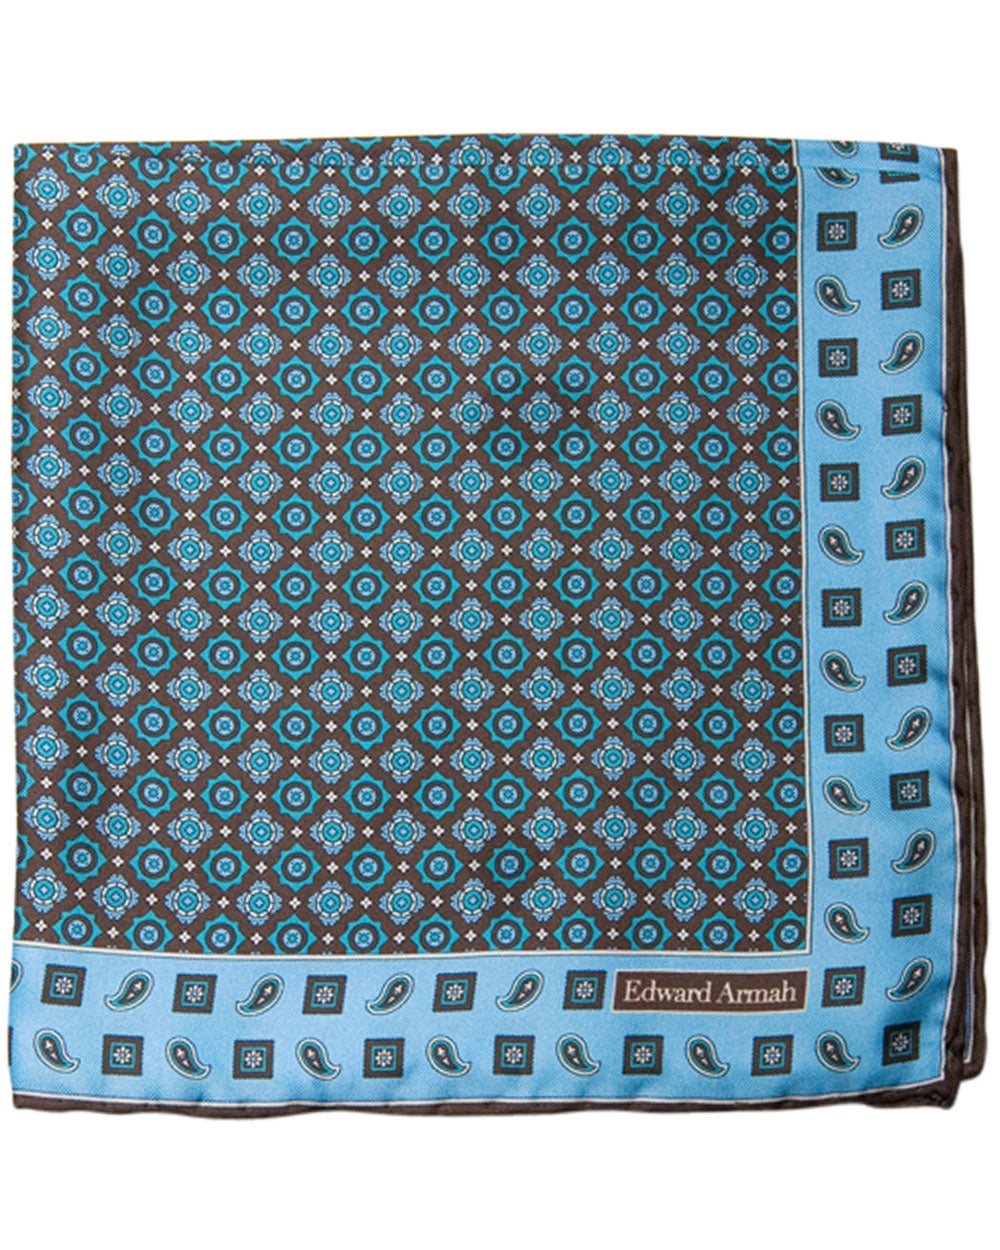 Pine Border Print Pocket Square in Brown and Teal